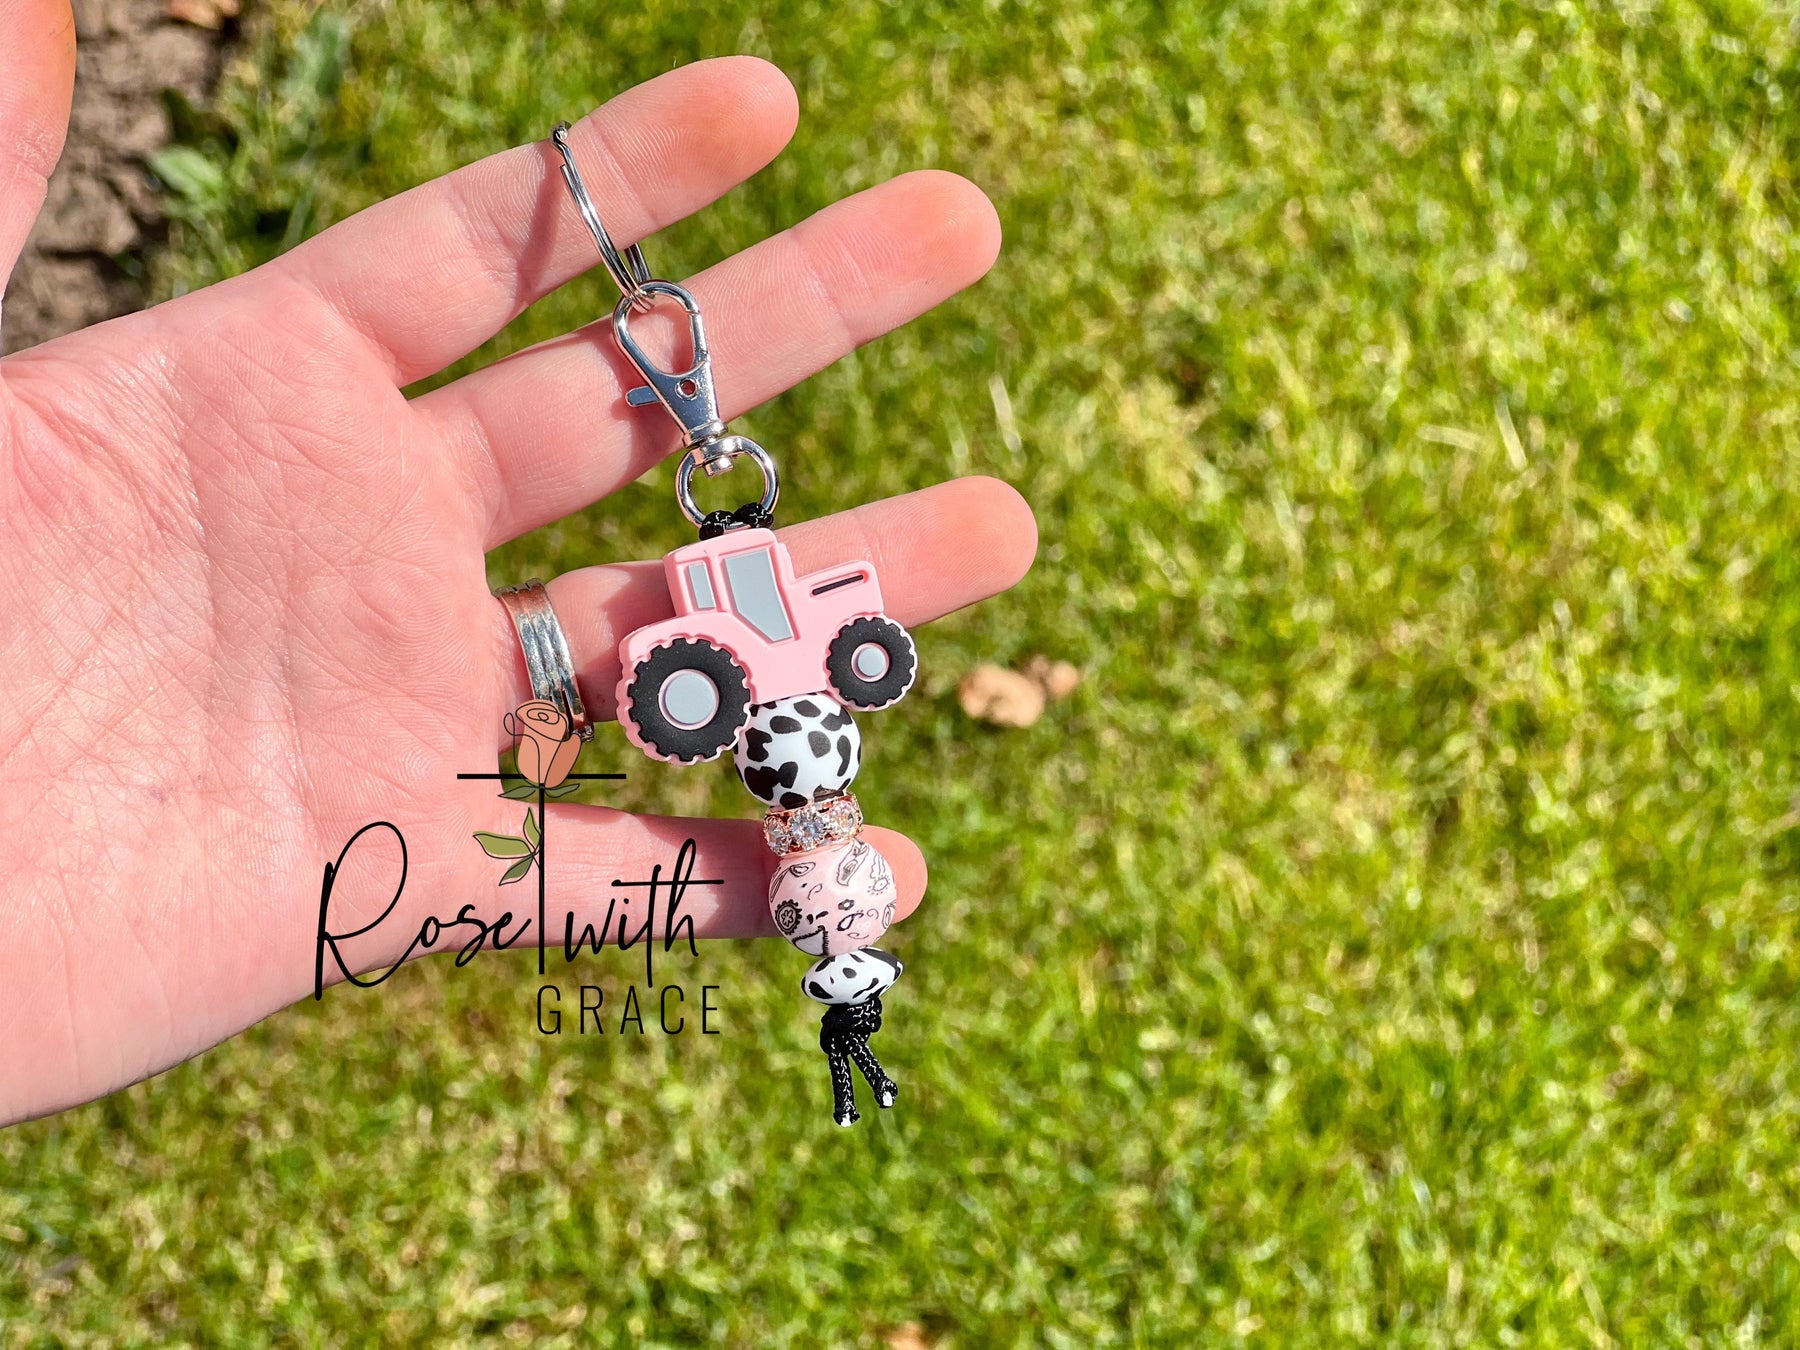 PINK TRACTOR MINI KEYCHAIN Rose with Grace LLC